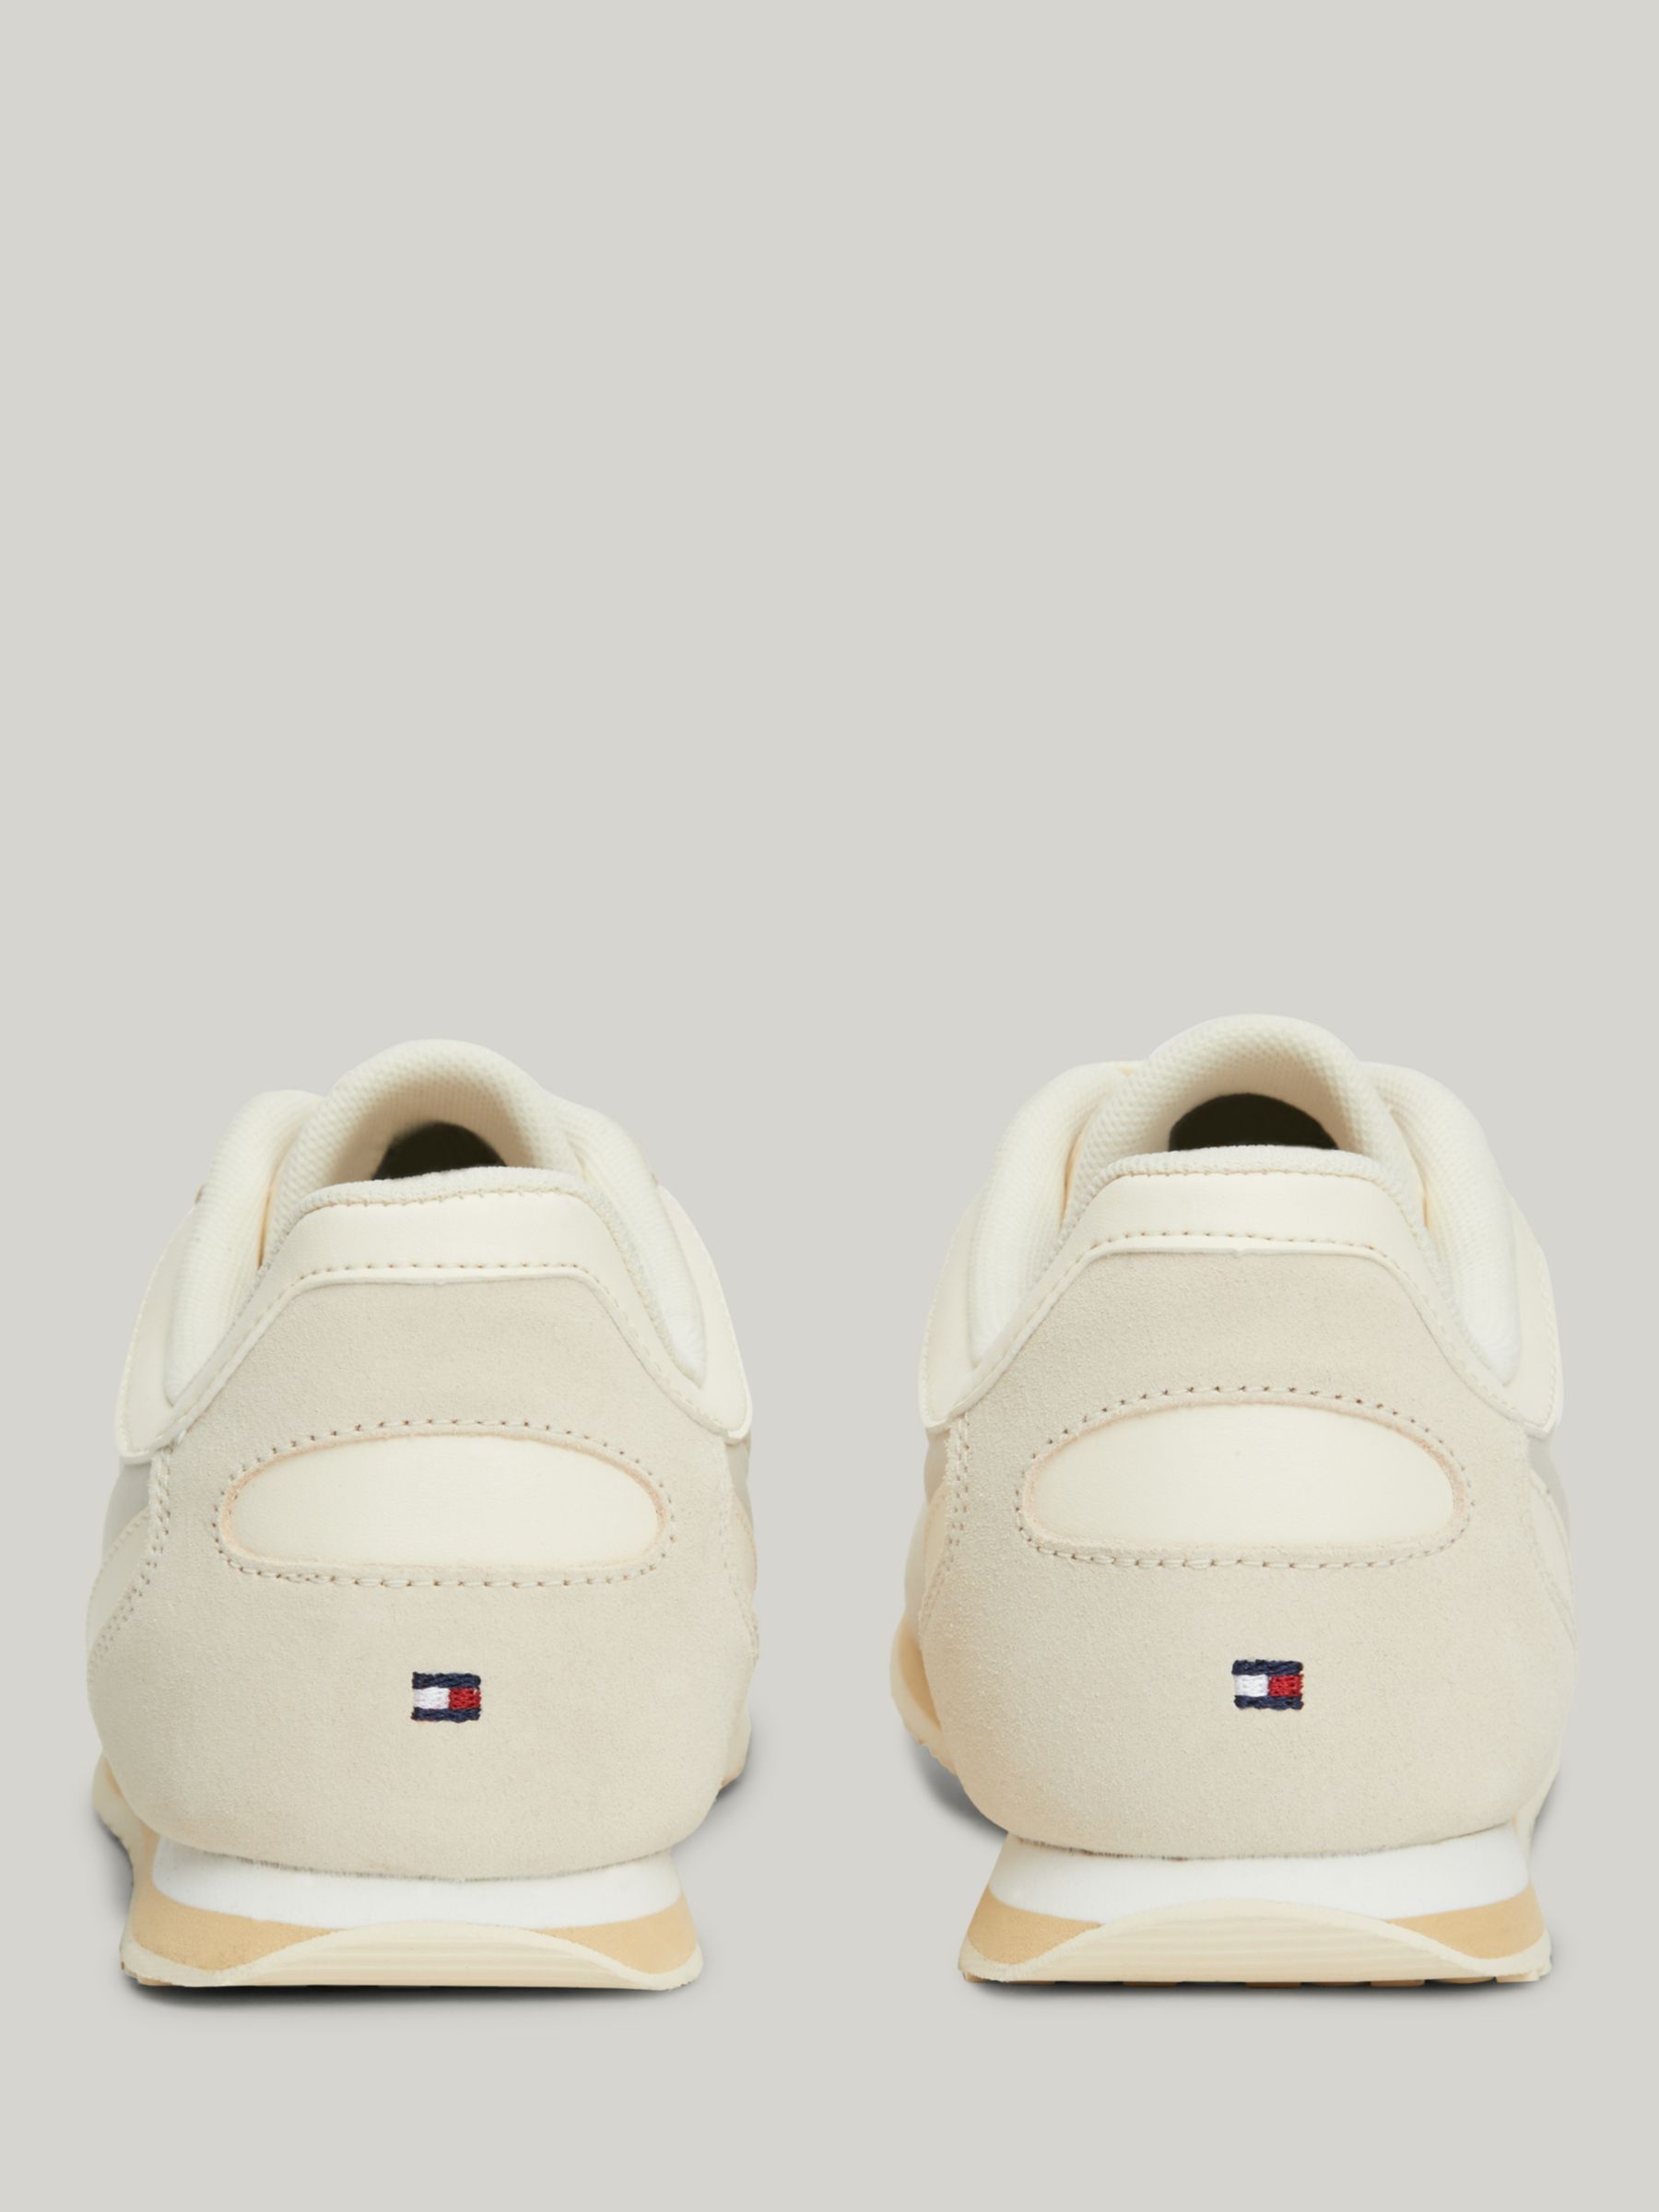 Buy Tommy Hilfiger Heritage Run Monogram Trainers, Calico Online at johnlewis.com